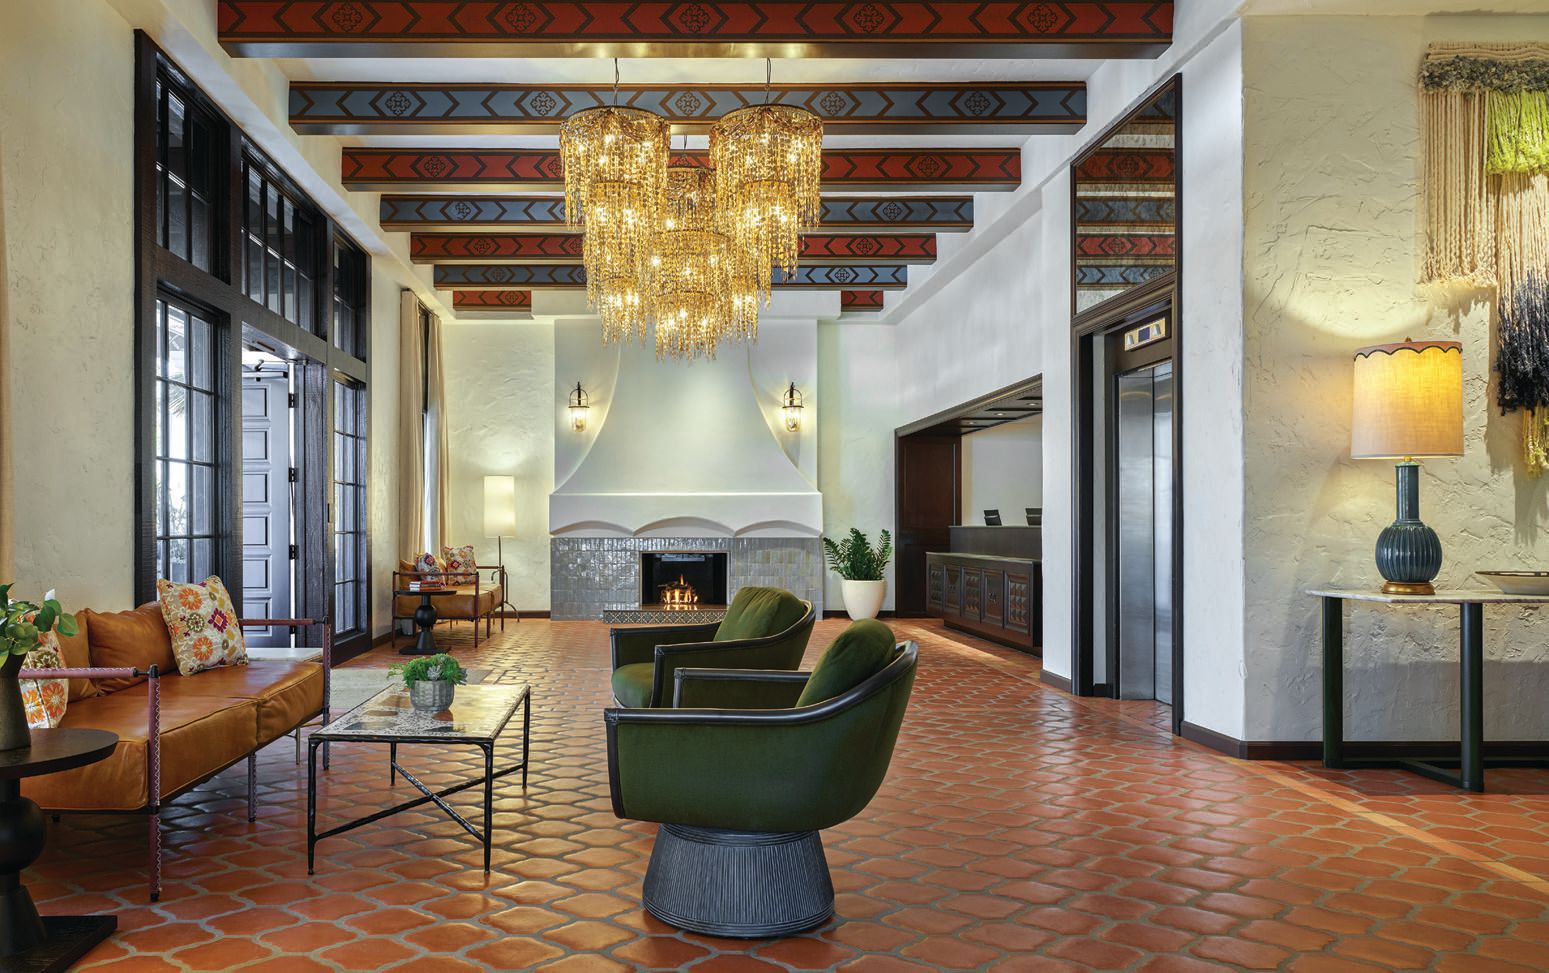 The refreshed lobby at Mar Monte Hotel still has classic charm PHOTO COURTESY OF MAR MONTE HOTEL